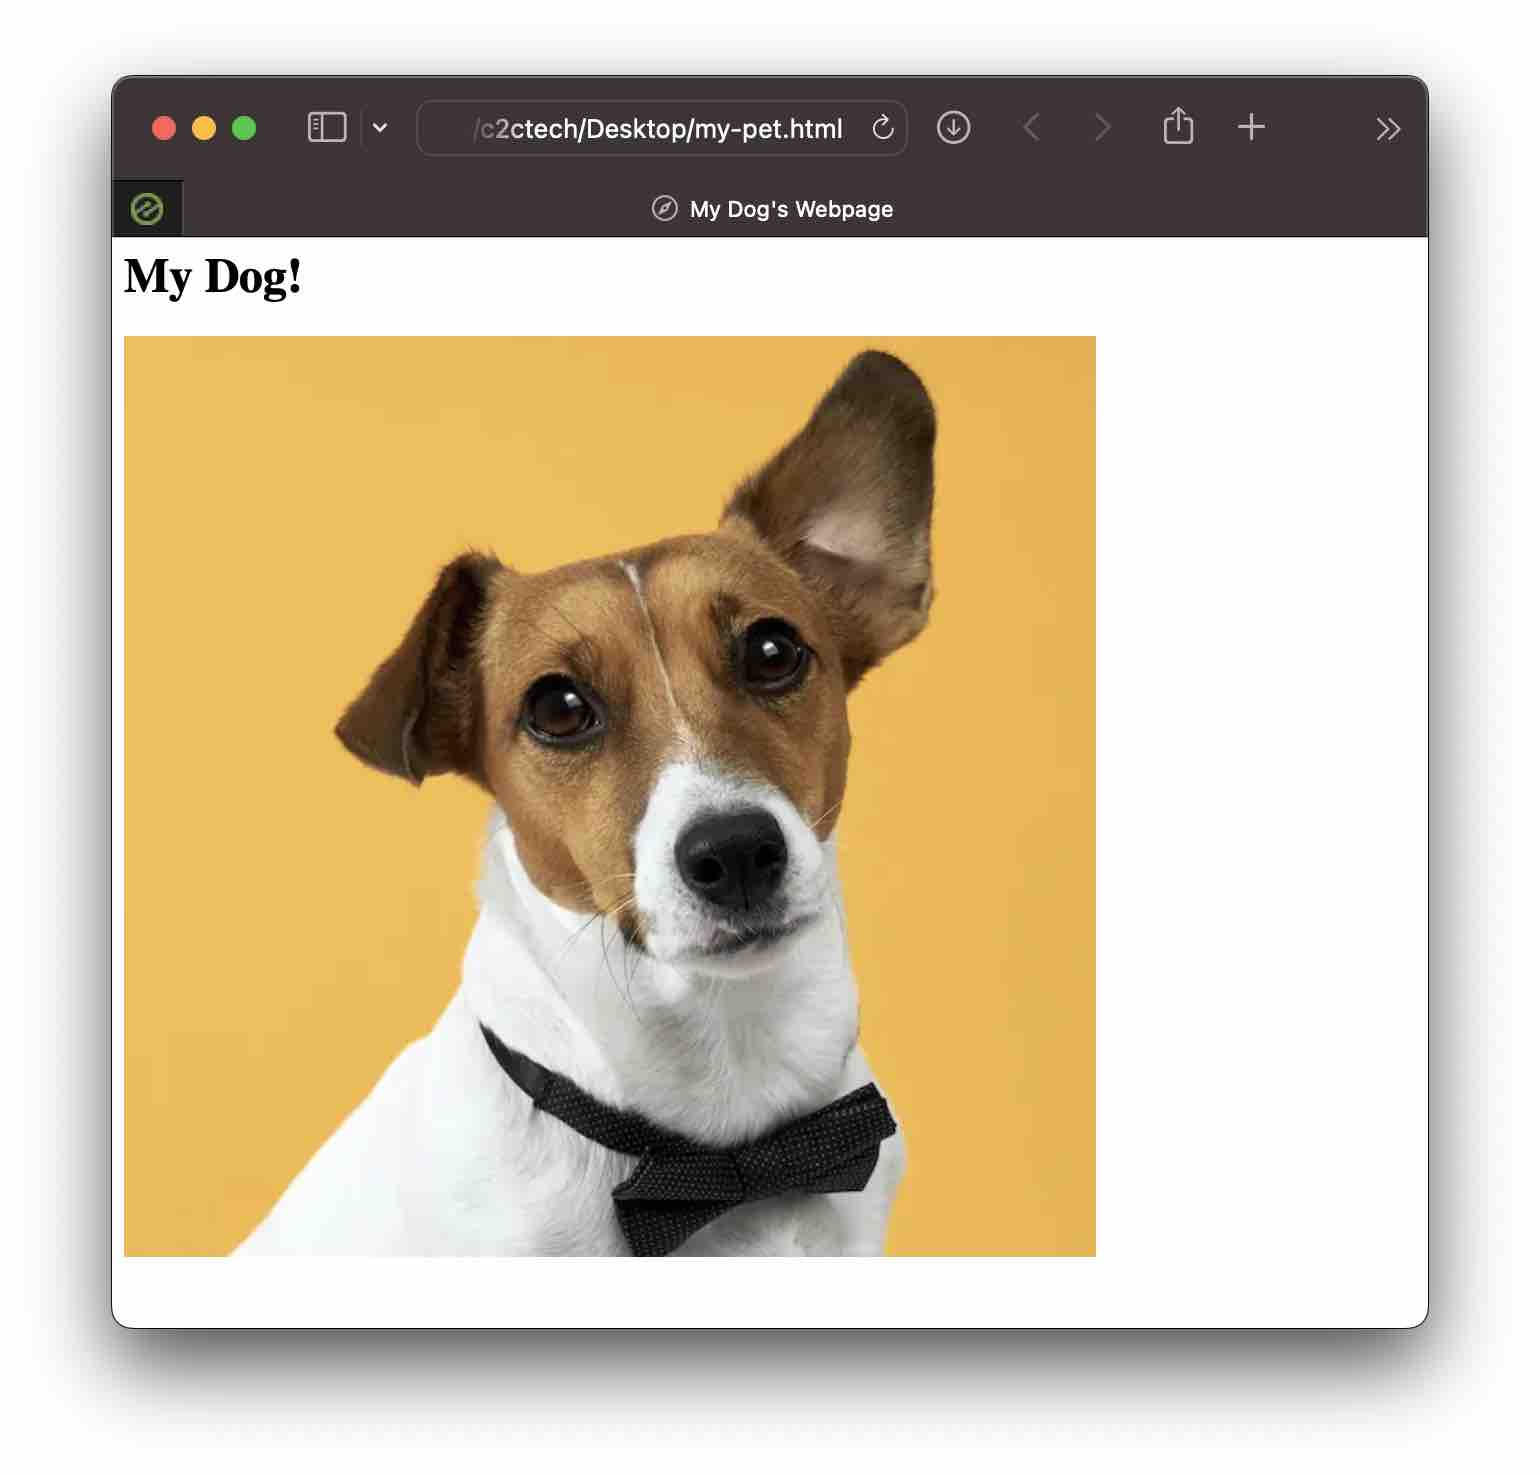 first-html-image-example-my-dogs-page